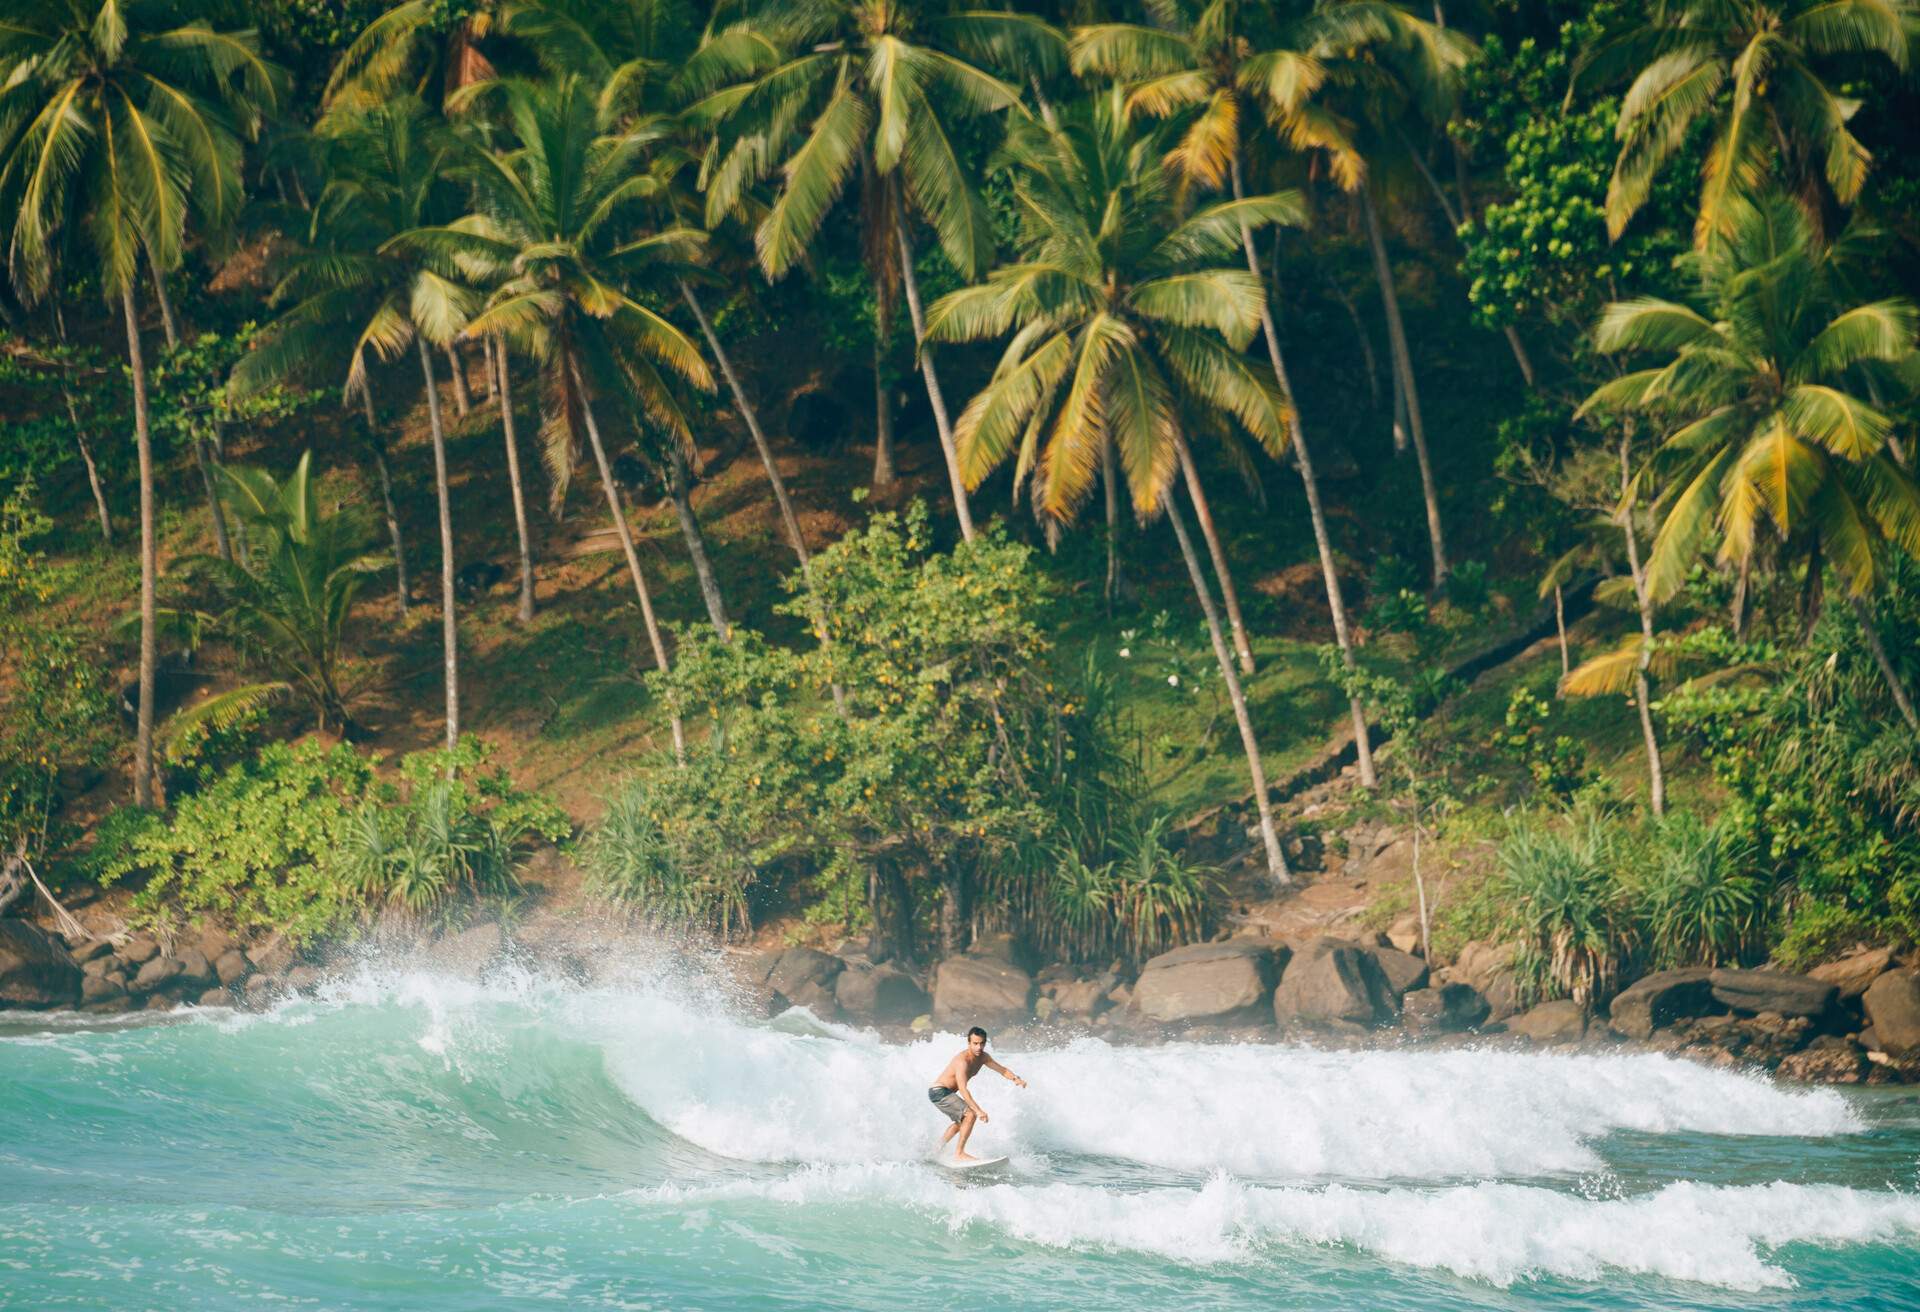 A man surfs with the sea's big white waves, bounded by a rocky hill packed with lush palm trees.